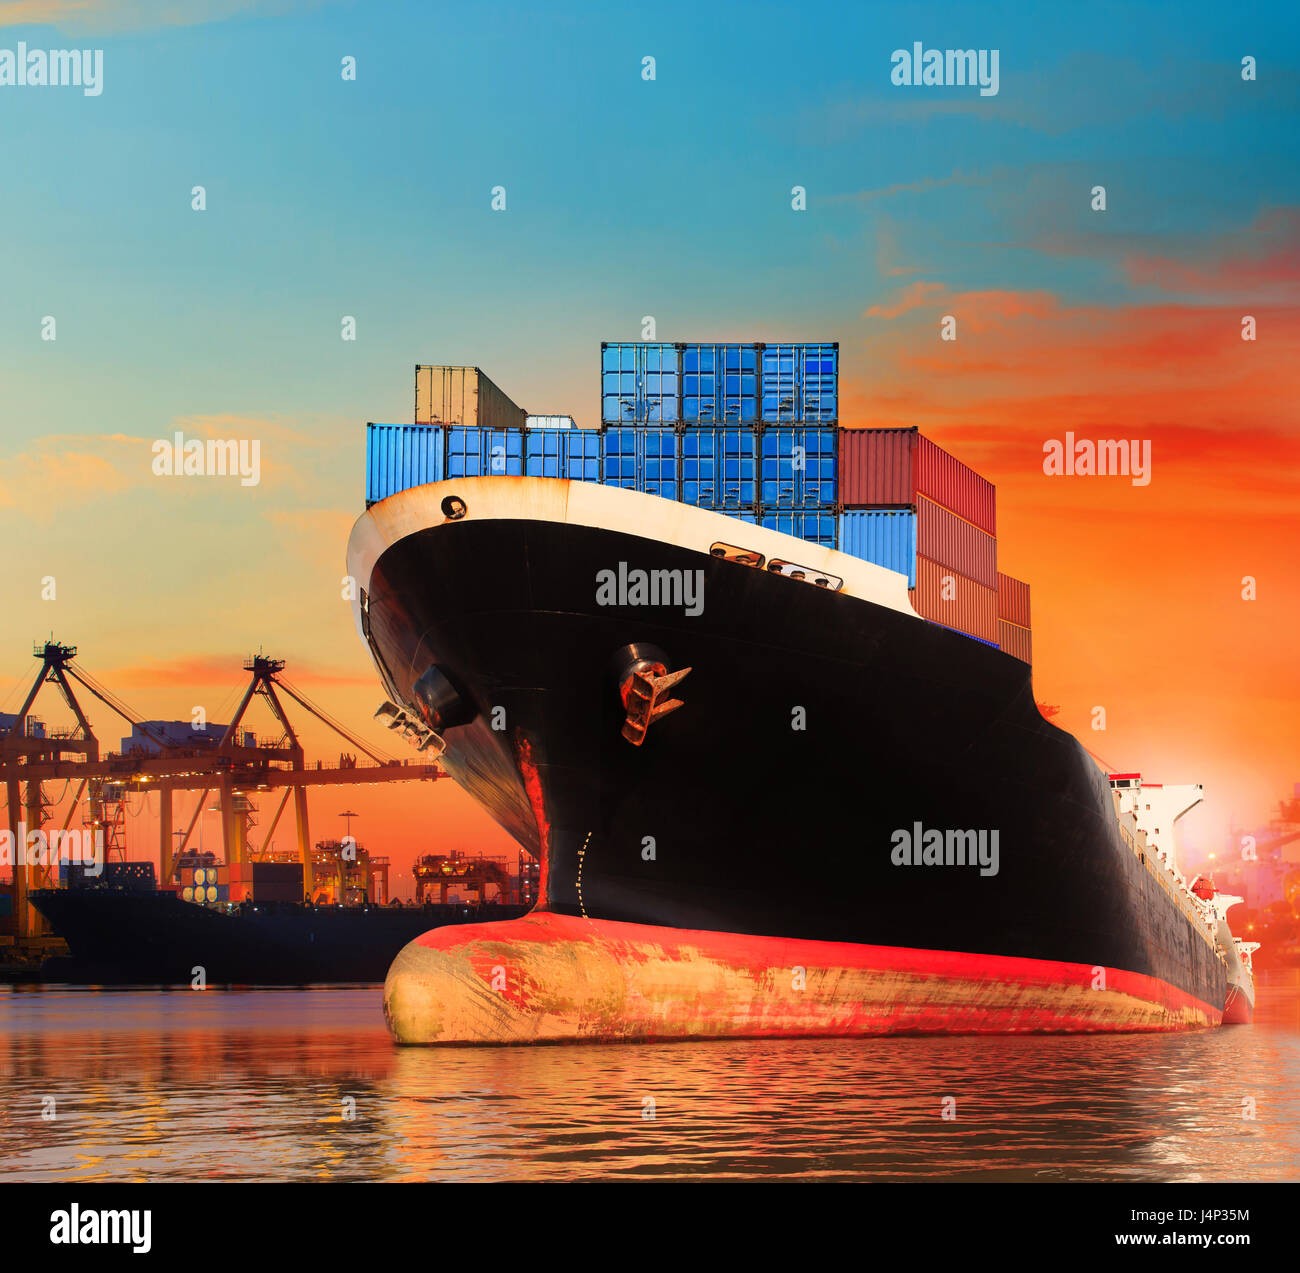 bic commercial ship in import,export pier use for vessel transport business  industry and cargo ,freight ,shipping port Stock Photo - Alamy